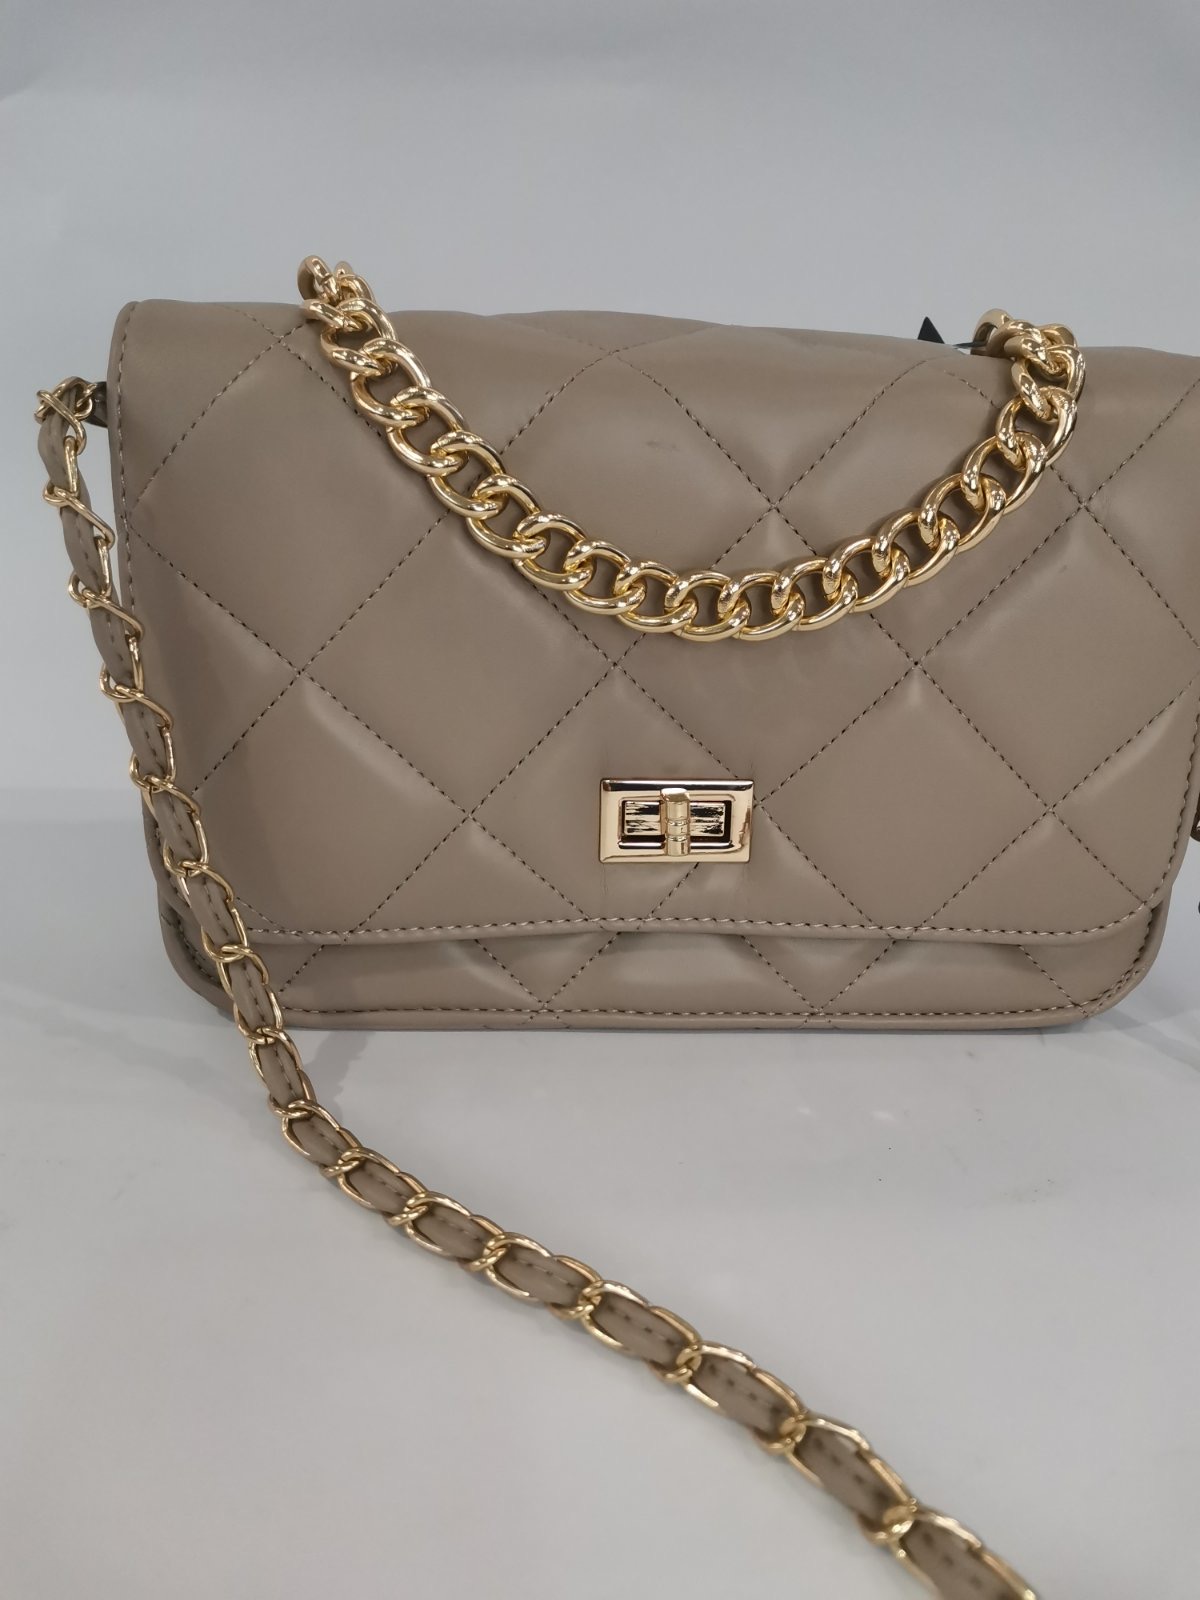 Shoulder bag with Chain in beige